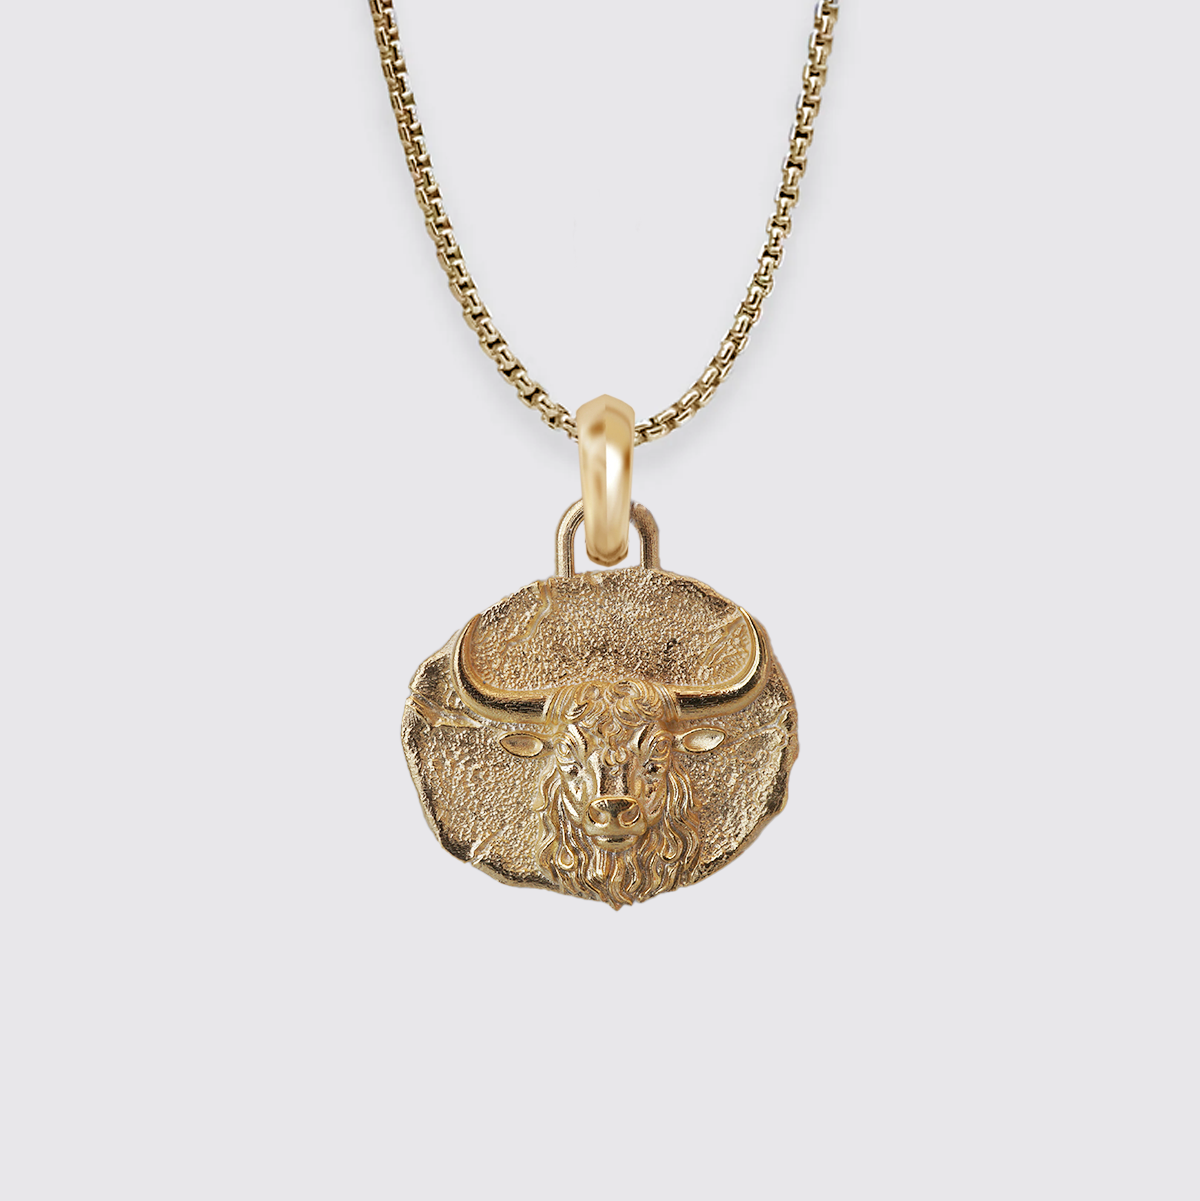 Taurus Zodiac Pendant in Sterling Silver and 14K Gold